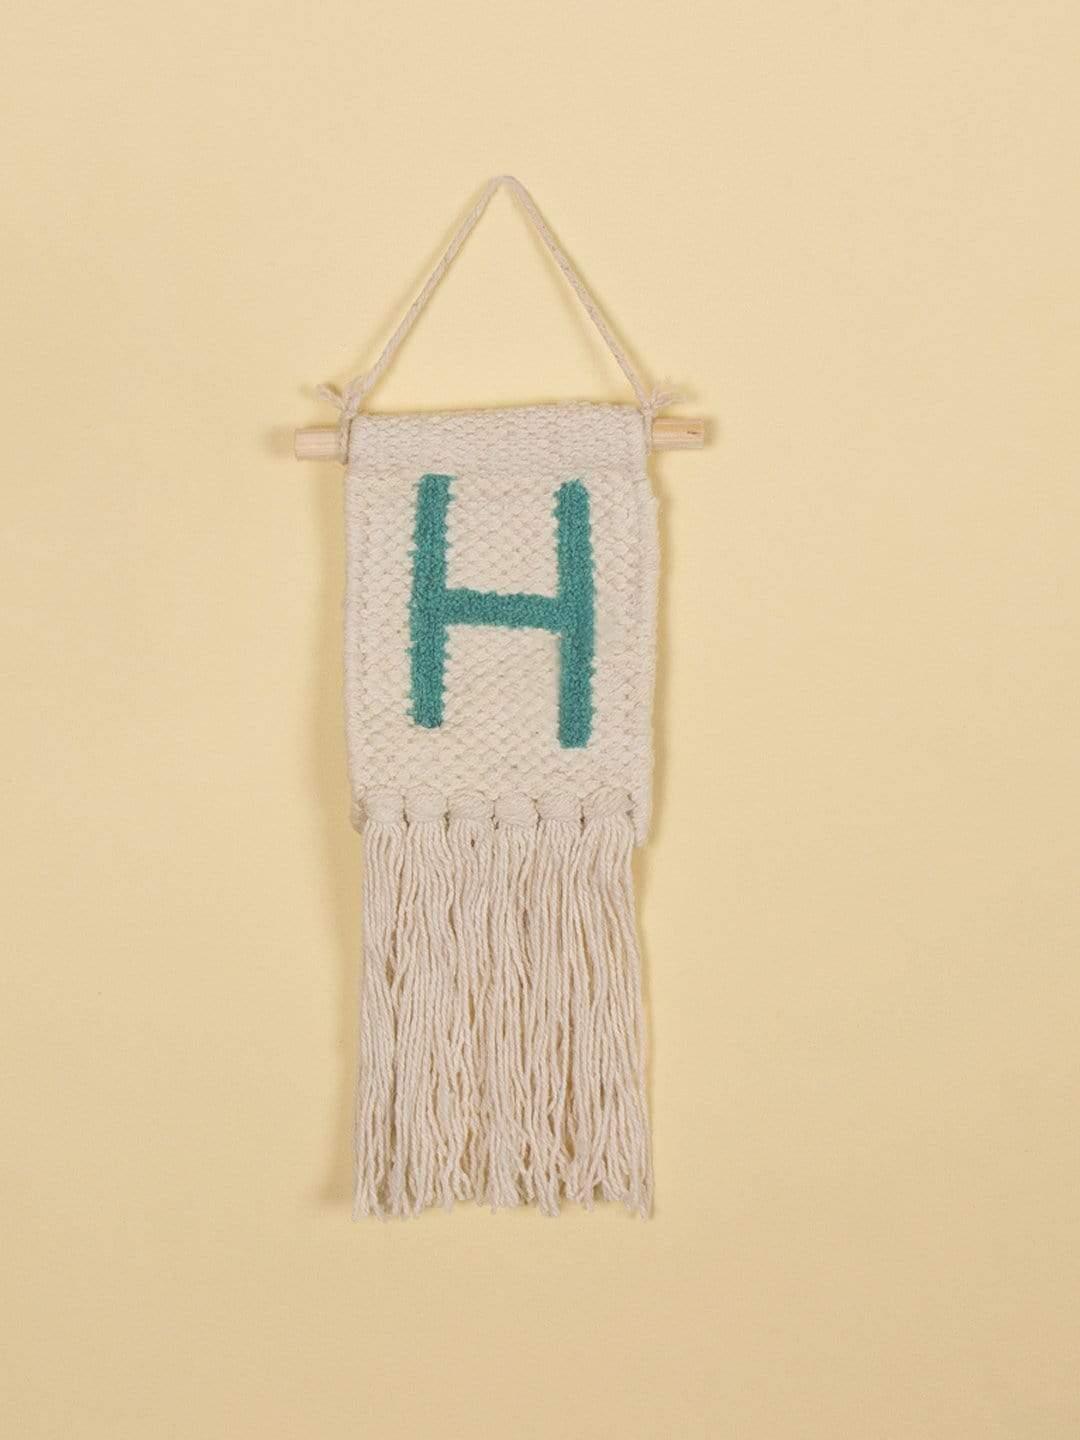 Monogram Mini Wall HangingMaterial: Cotton
Dimensions: 4L inch x 10H inch.
Note: The Alphabet letter embroidery is made of recycled thread the color will vary as per the availability.

The ImMonogram Mini Wall HangingThe Wishing Chair